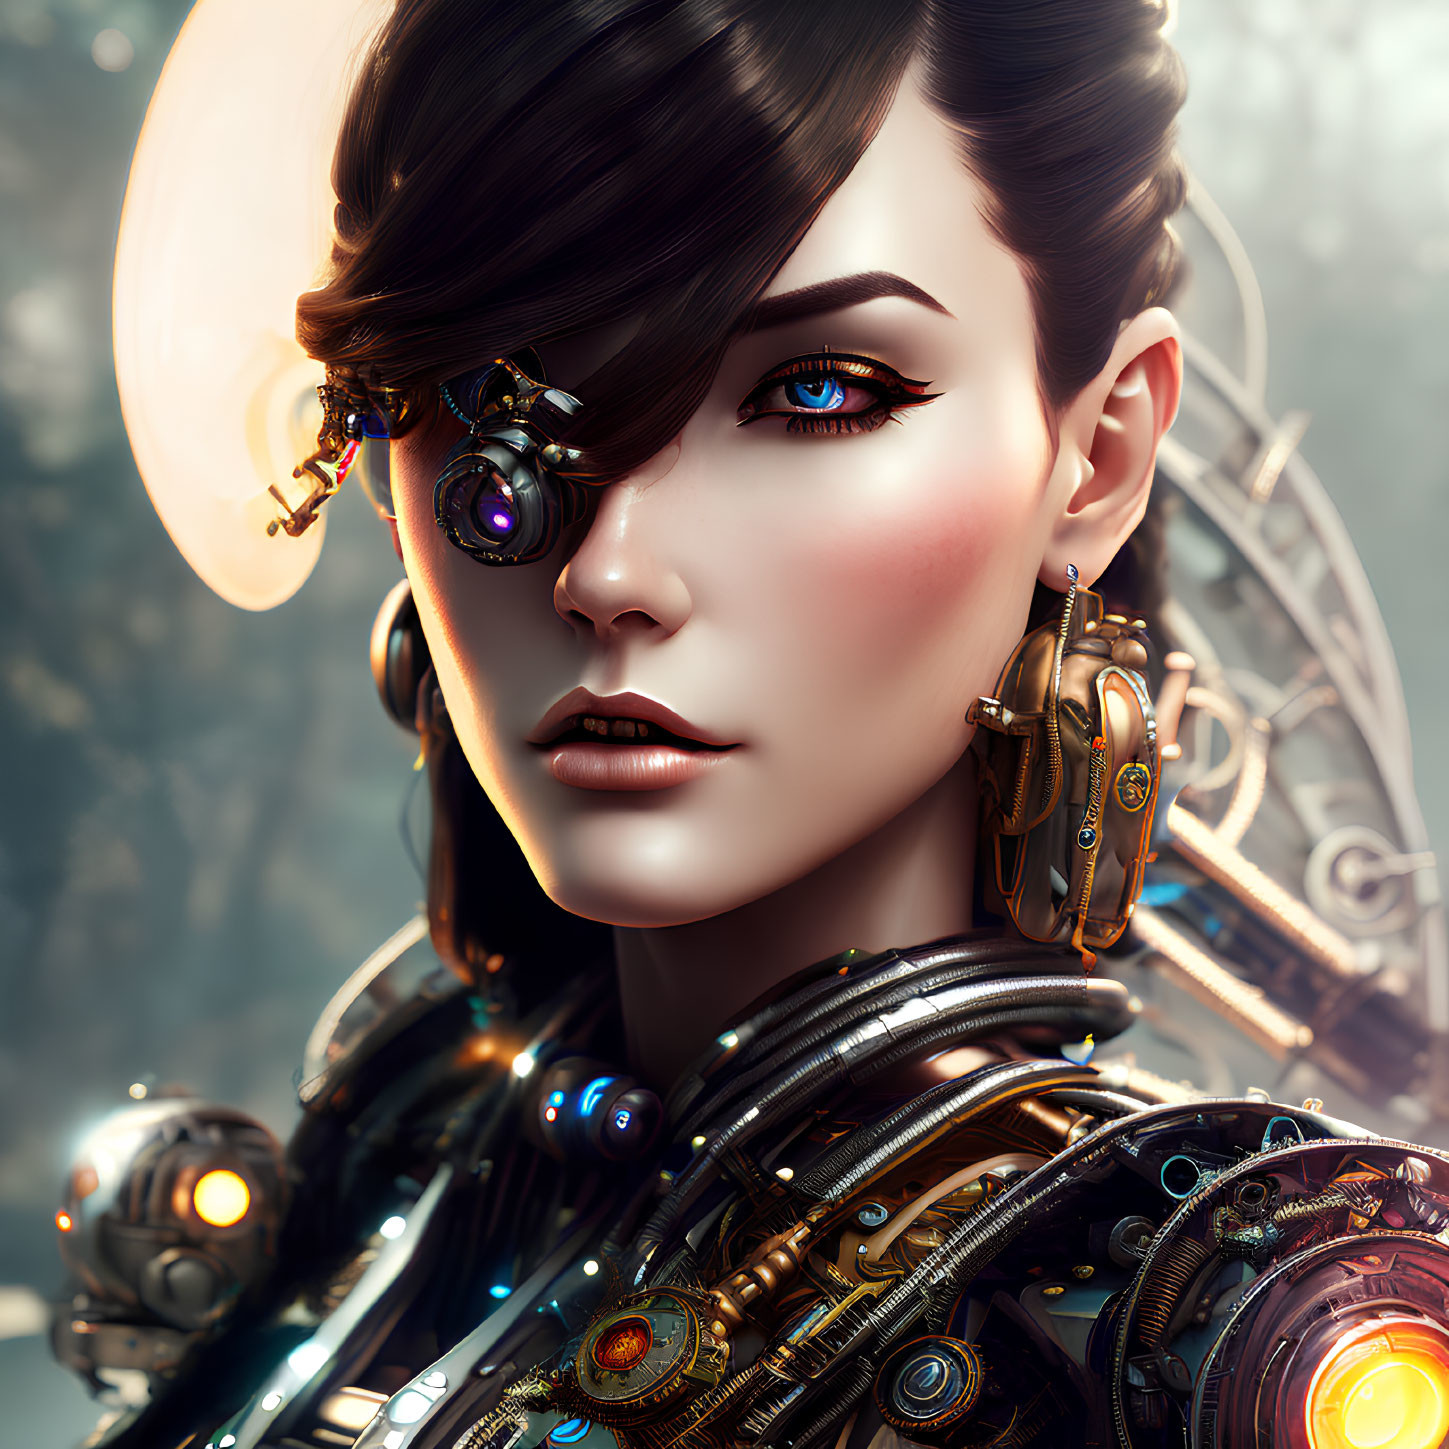 Steampunk-themed digital art of a woman in mechanical suit with monocle